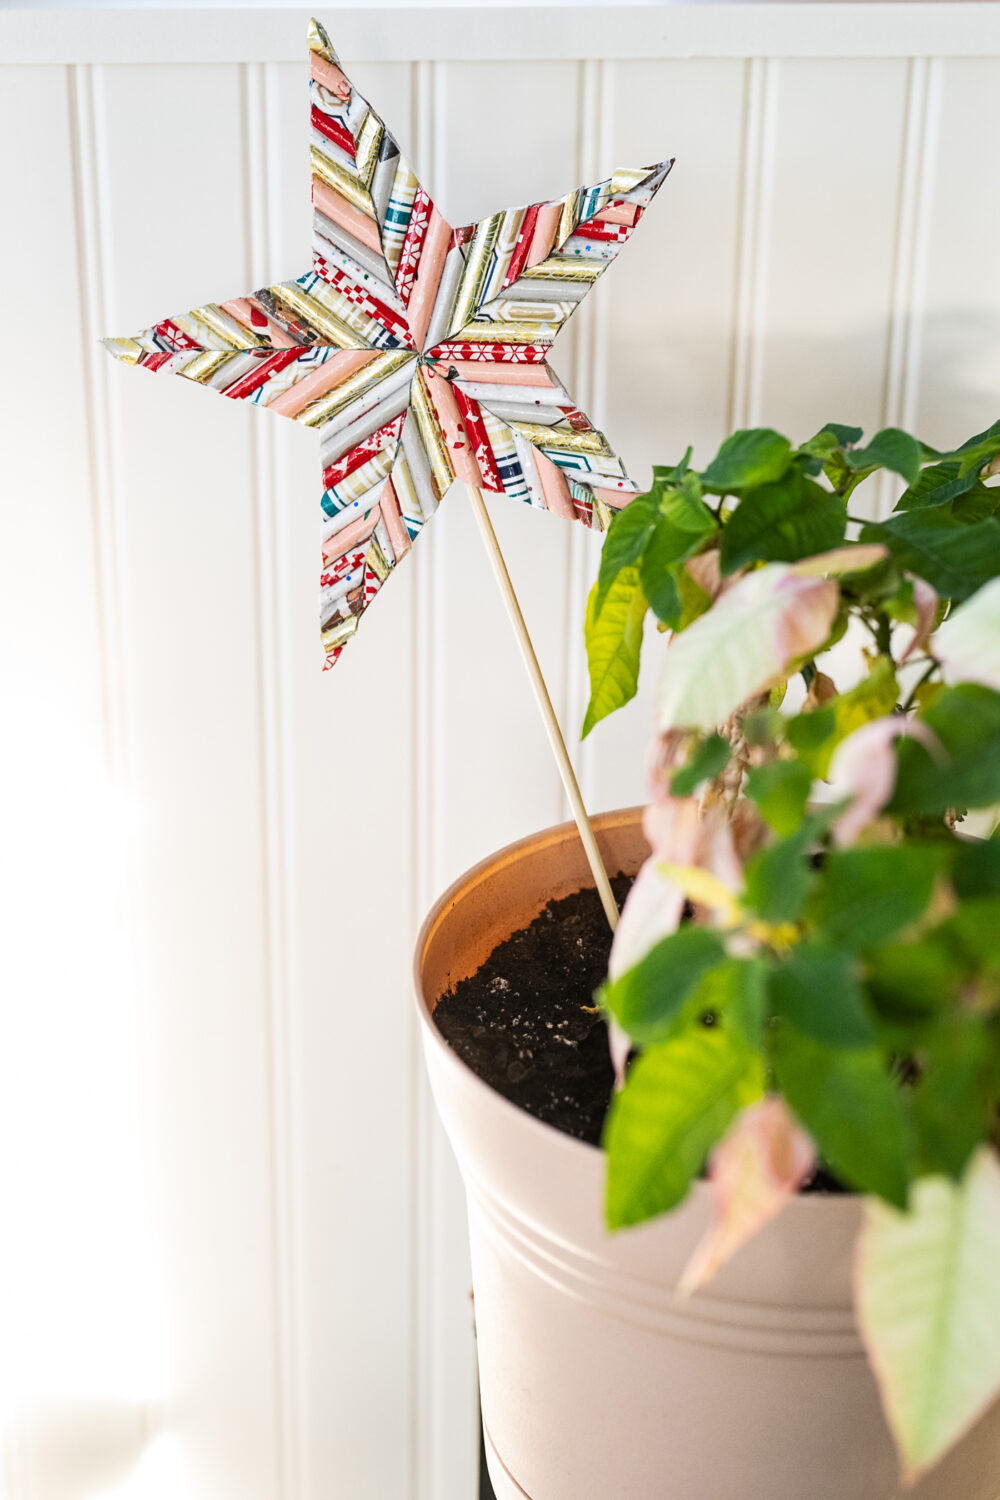 Reuse Wrapping Paper in This Adorable Upcycled Paper Star Project